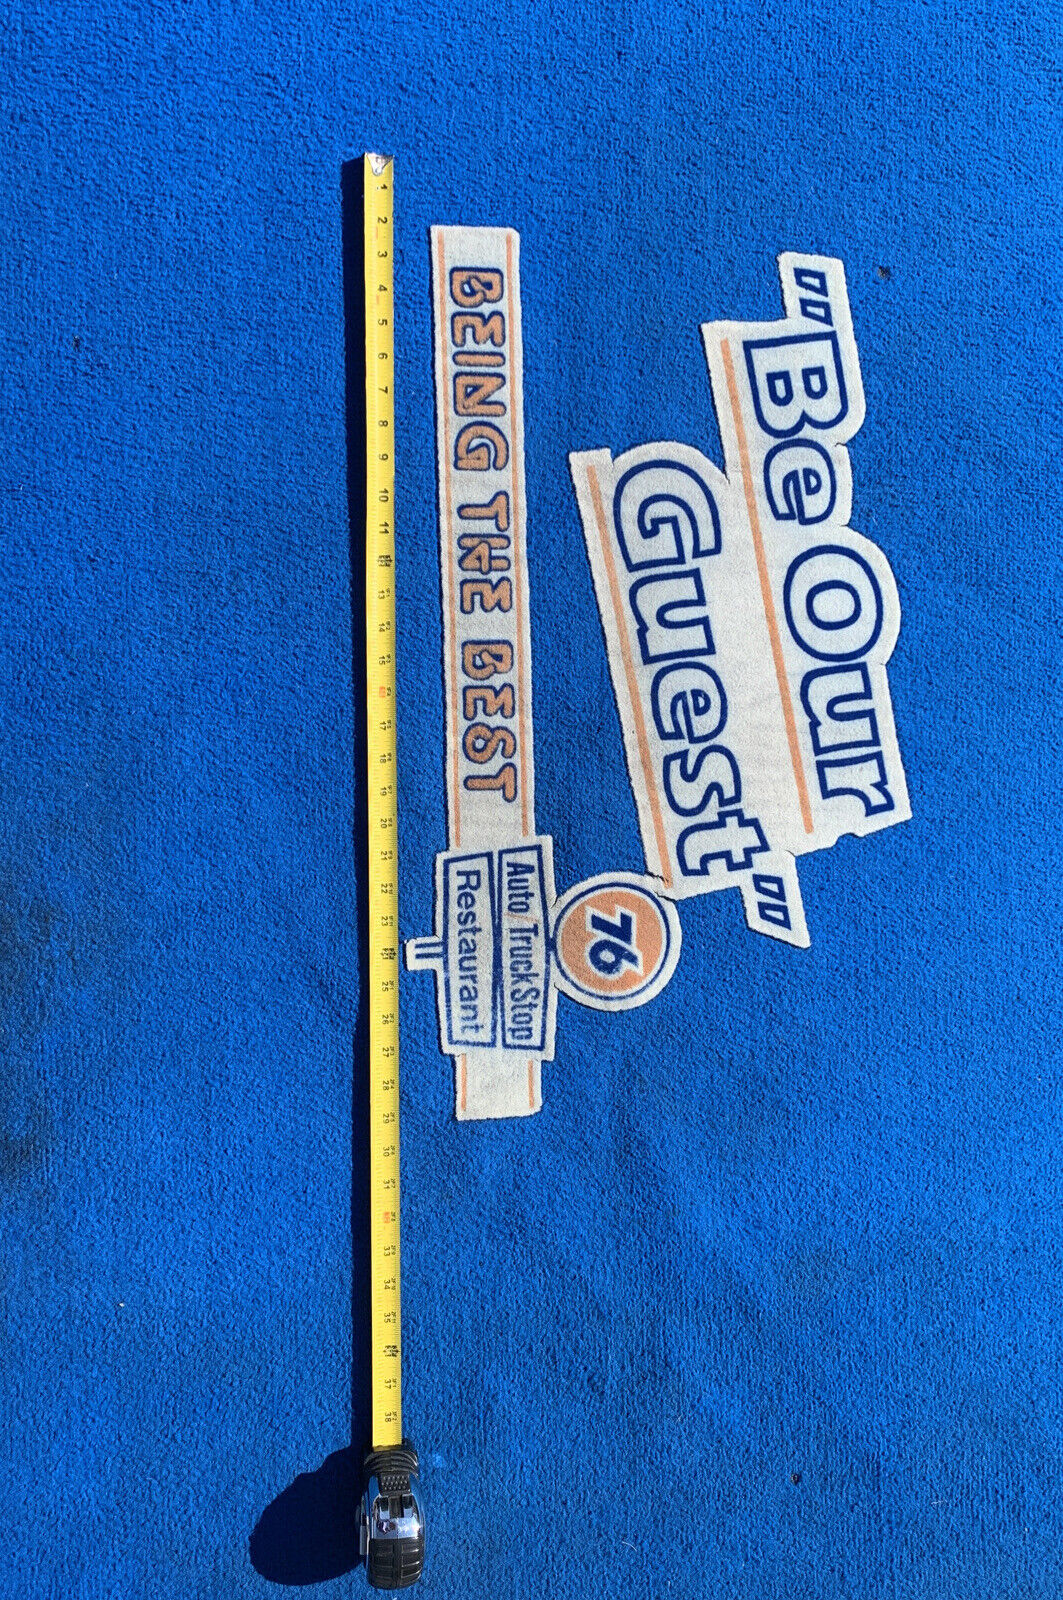 Vintage - Rare 76 “Be Our Guest” Being The Best” 4x6 Rubber Backed Floor Matt.